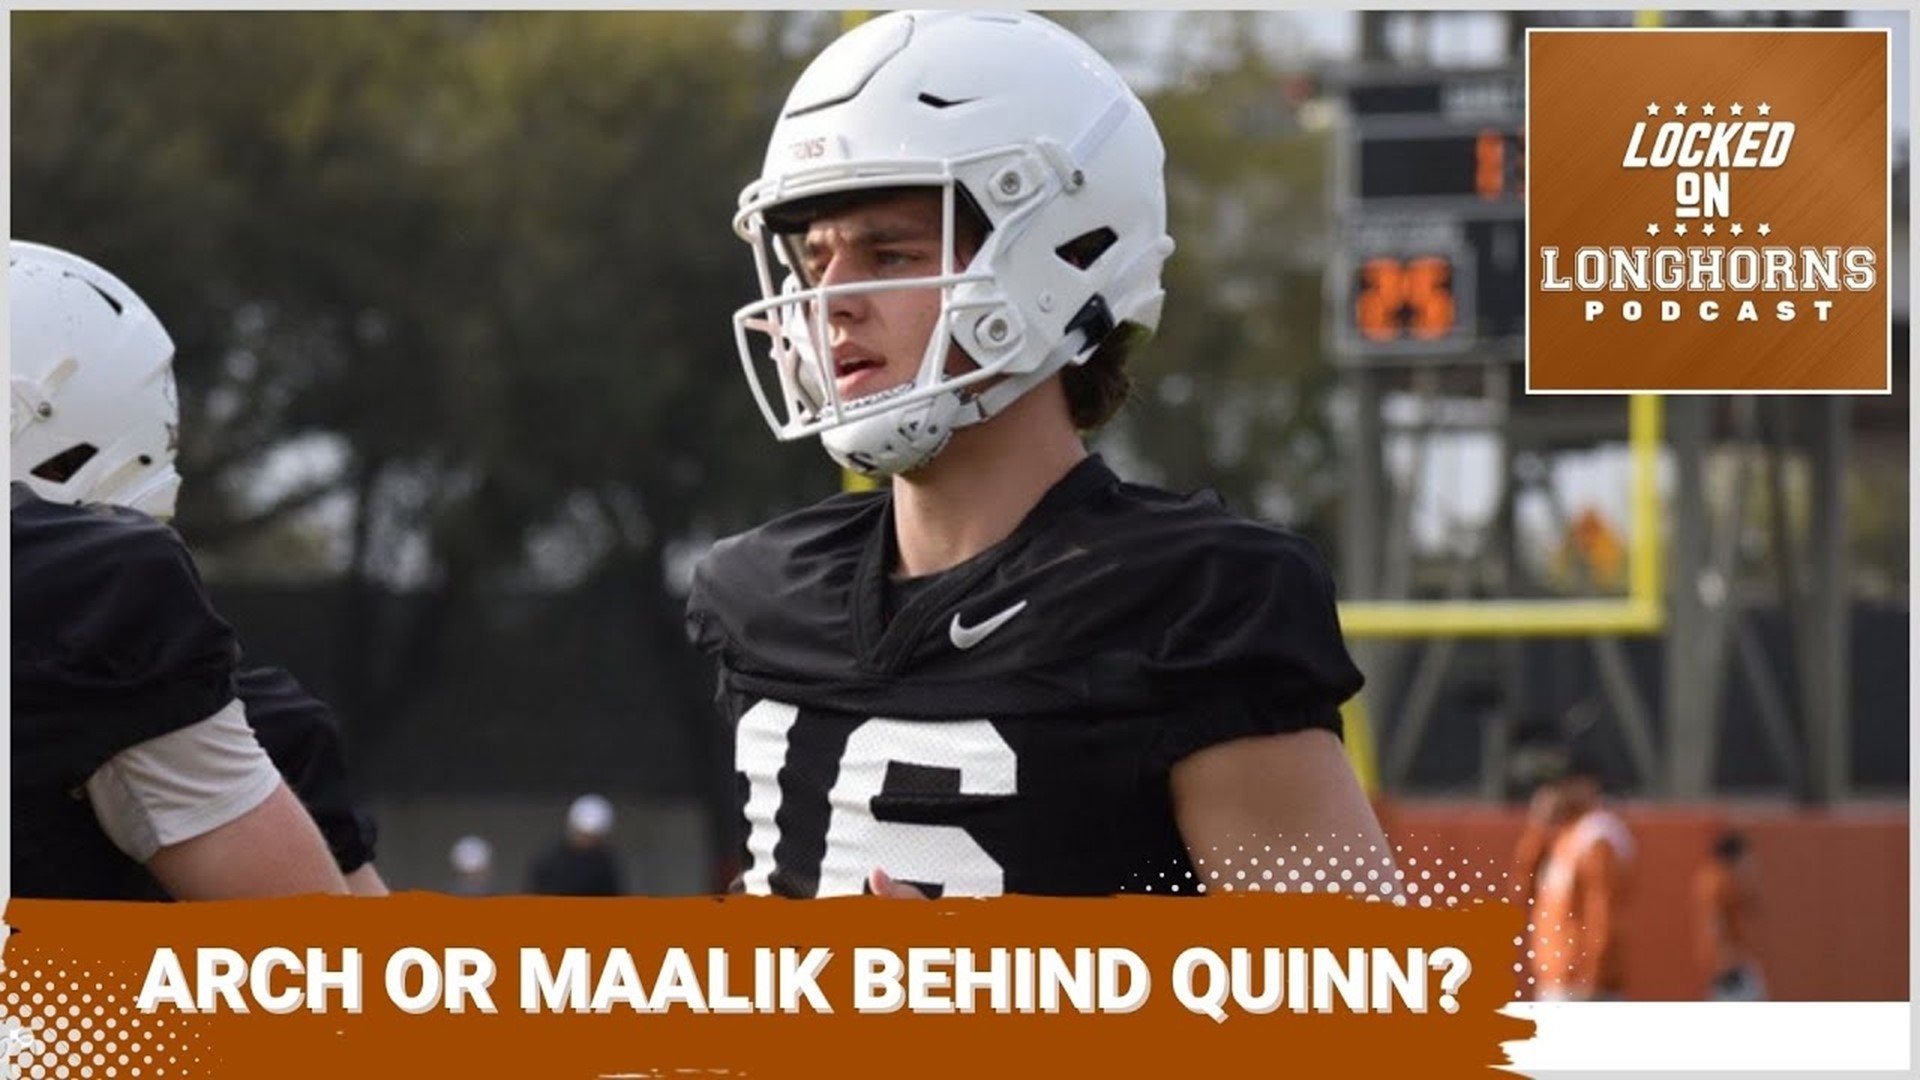 The Texas Longhorns football team has talent at the quarterback position that we haven't seen in a while, maybe ever.